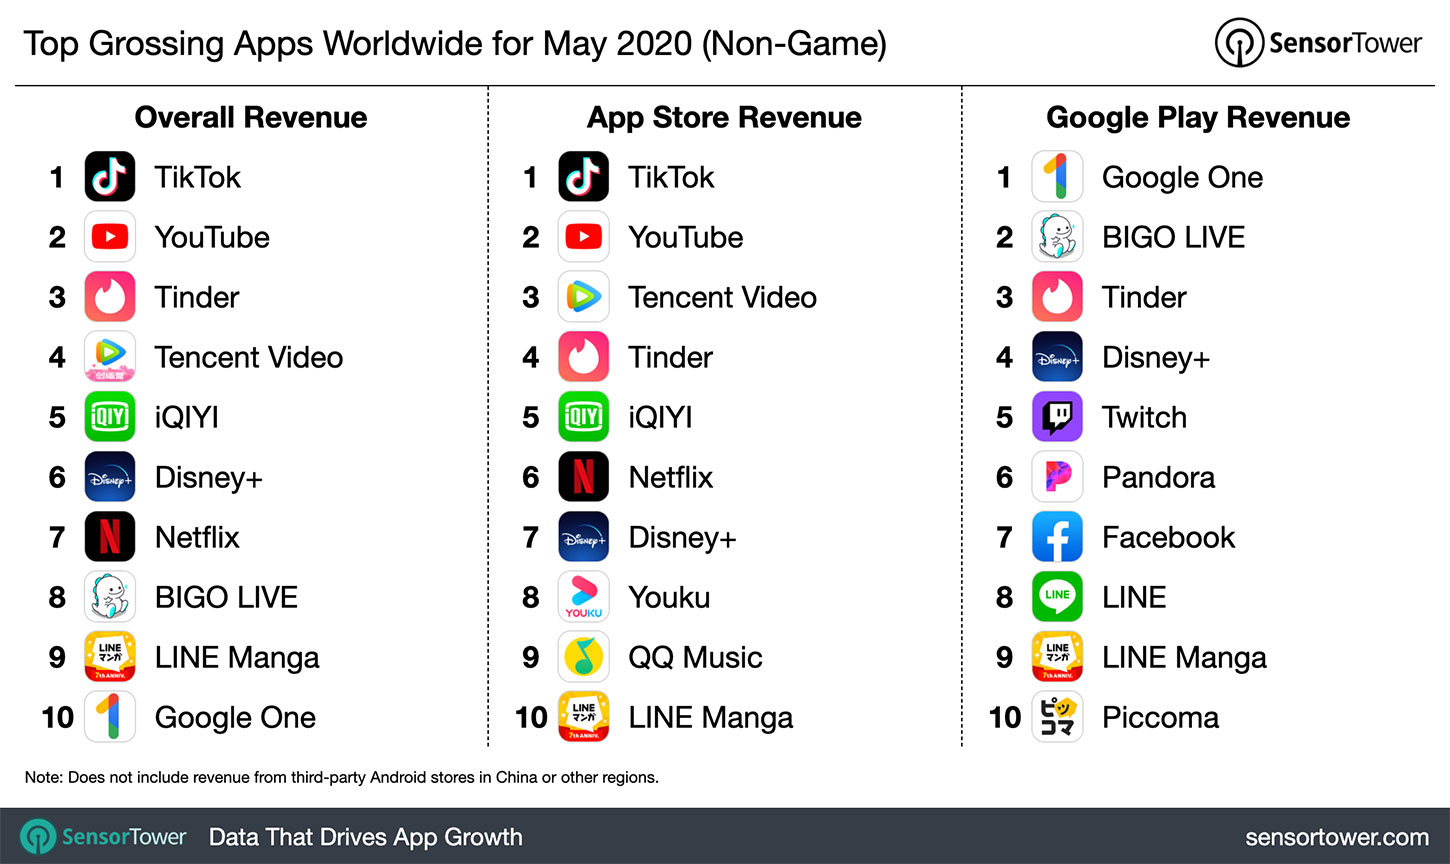 “Top Grossing Apps Worldwide for May 2020